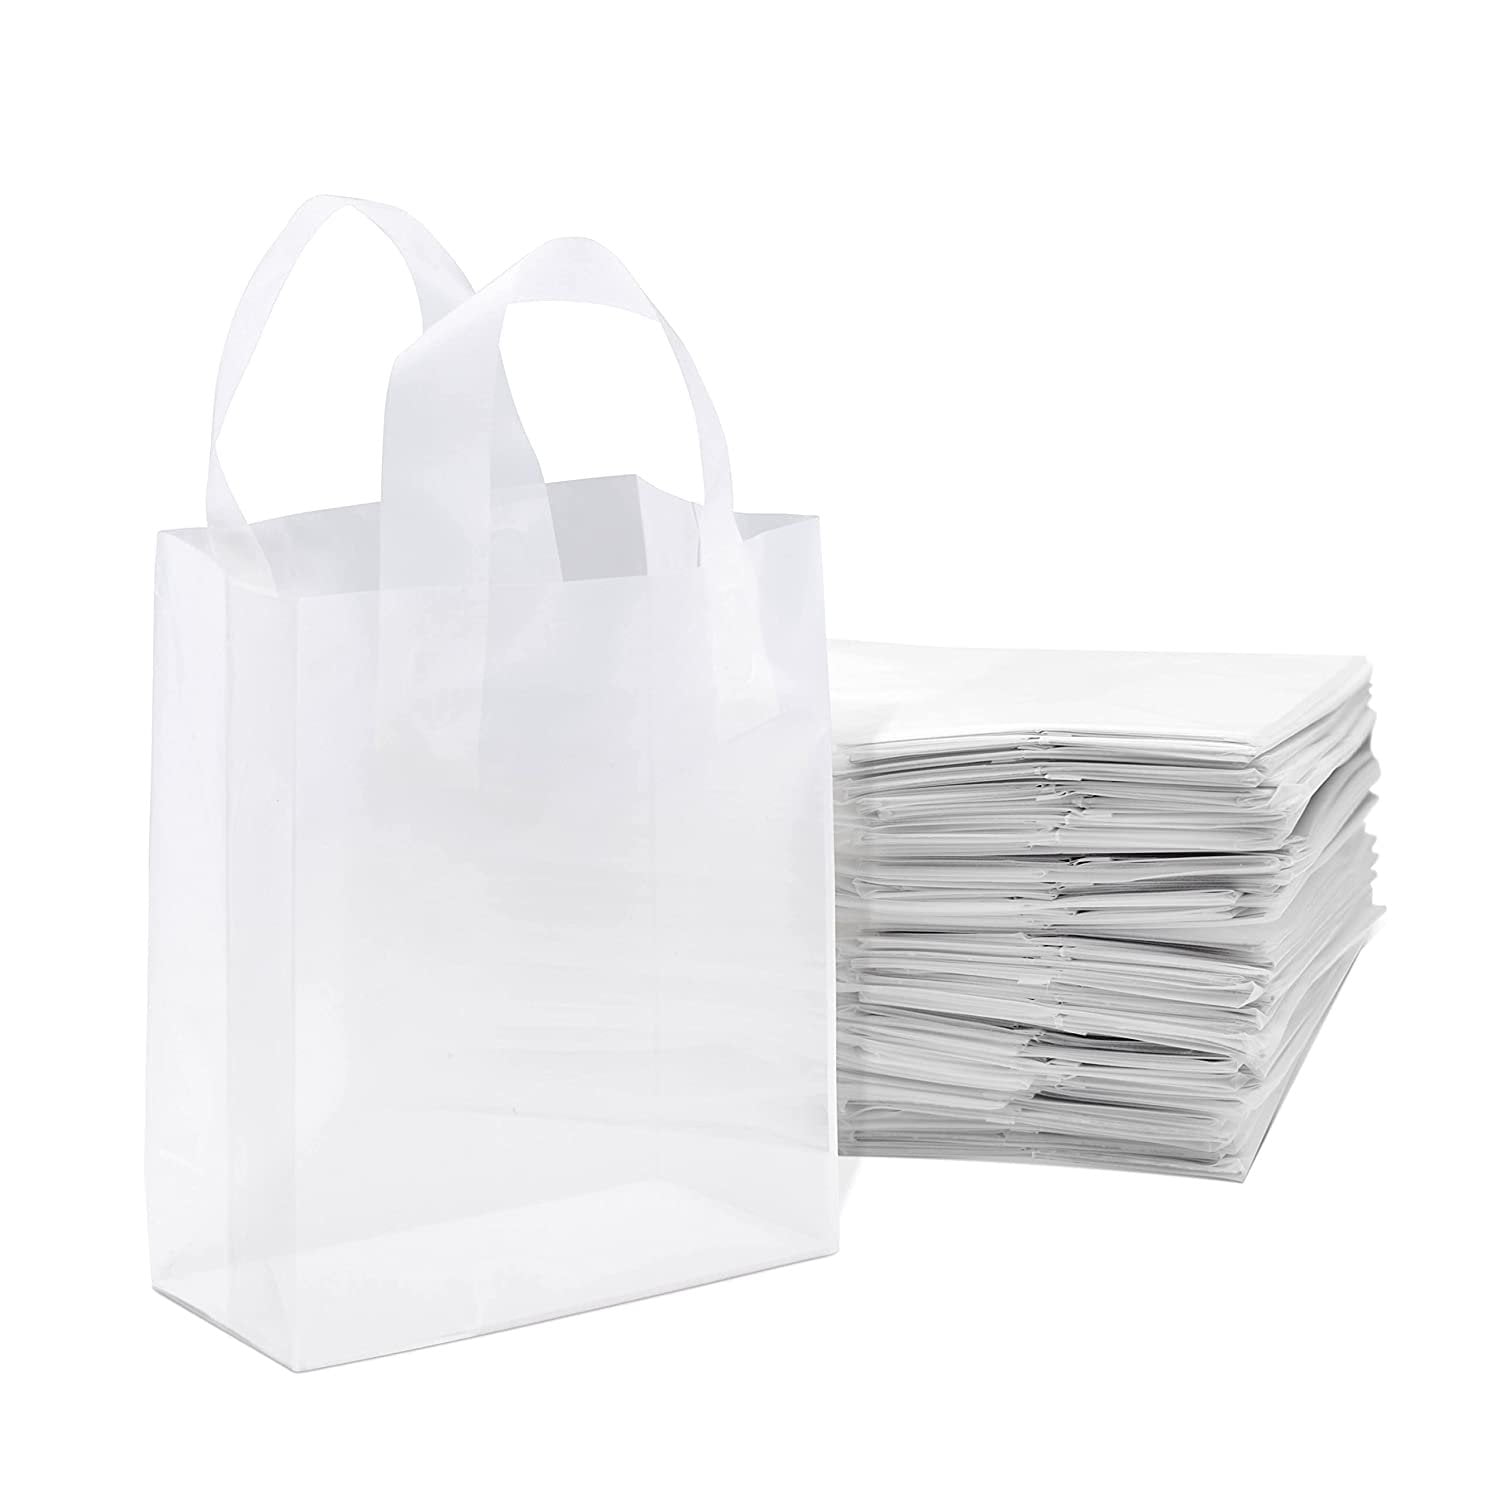 50 Plastic Grocery Bags Single Use Clean Folded Art Crafts Trash Bag 